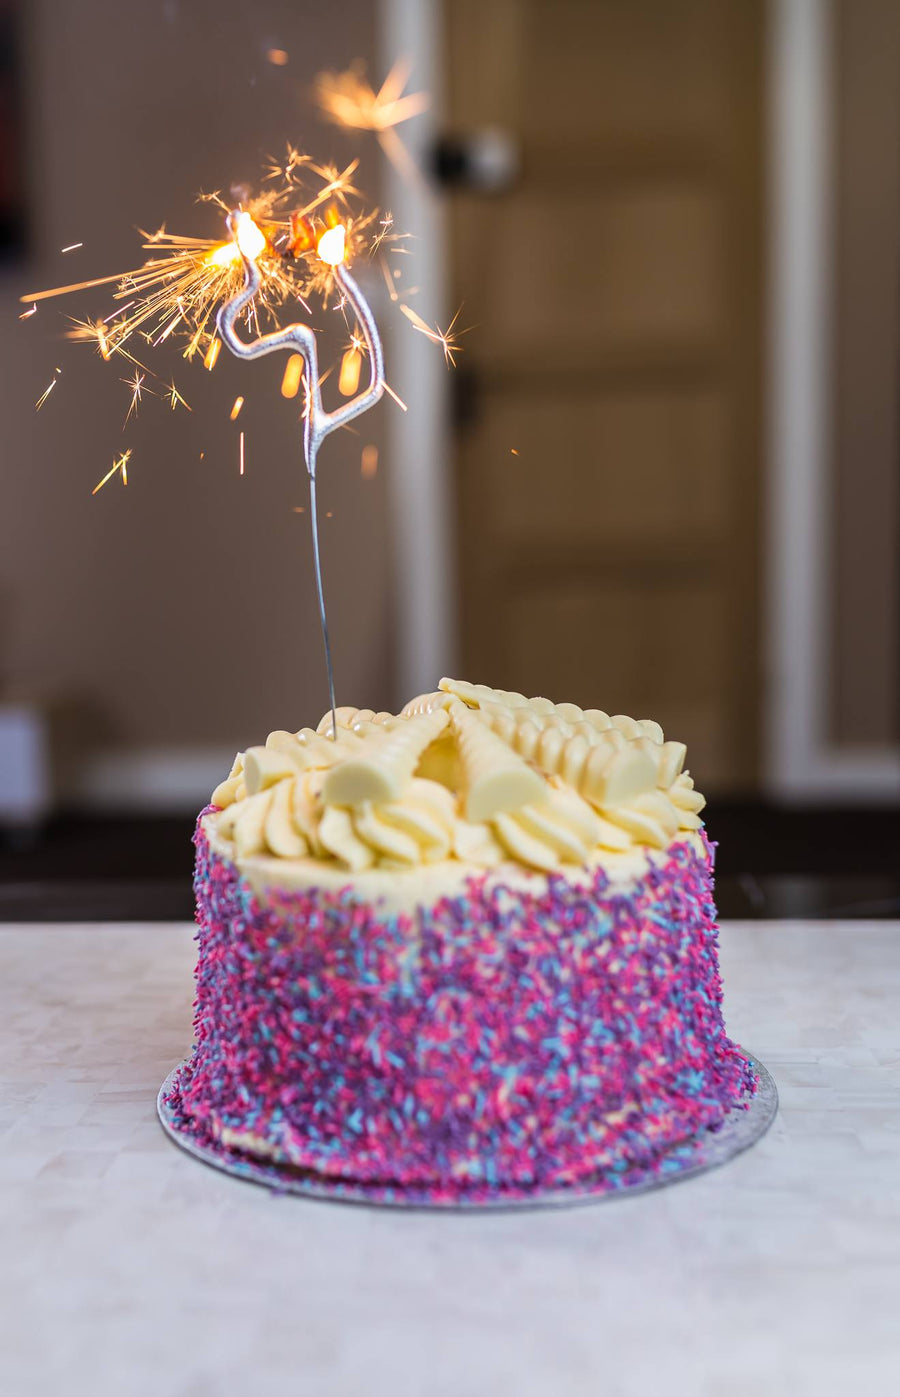 Premium AI Image | A birthday cake with lit candles is lit with sparklers  in the background.